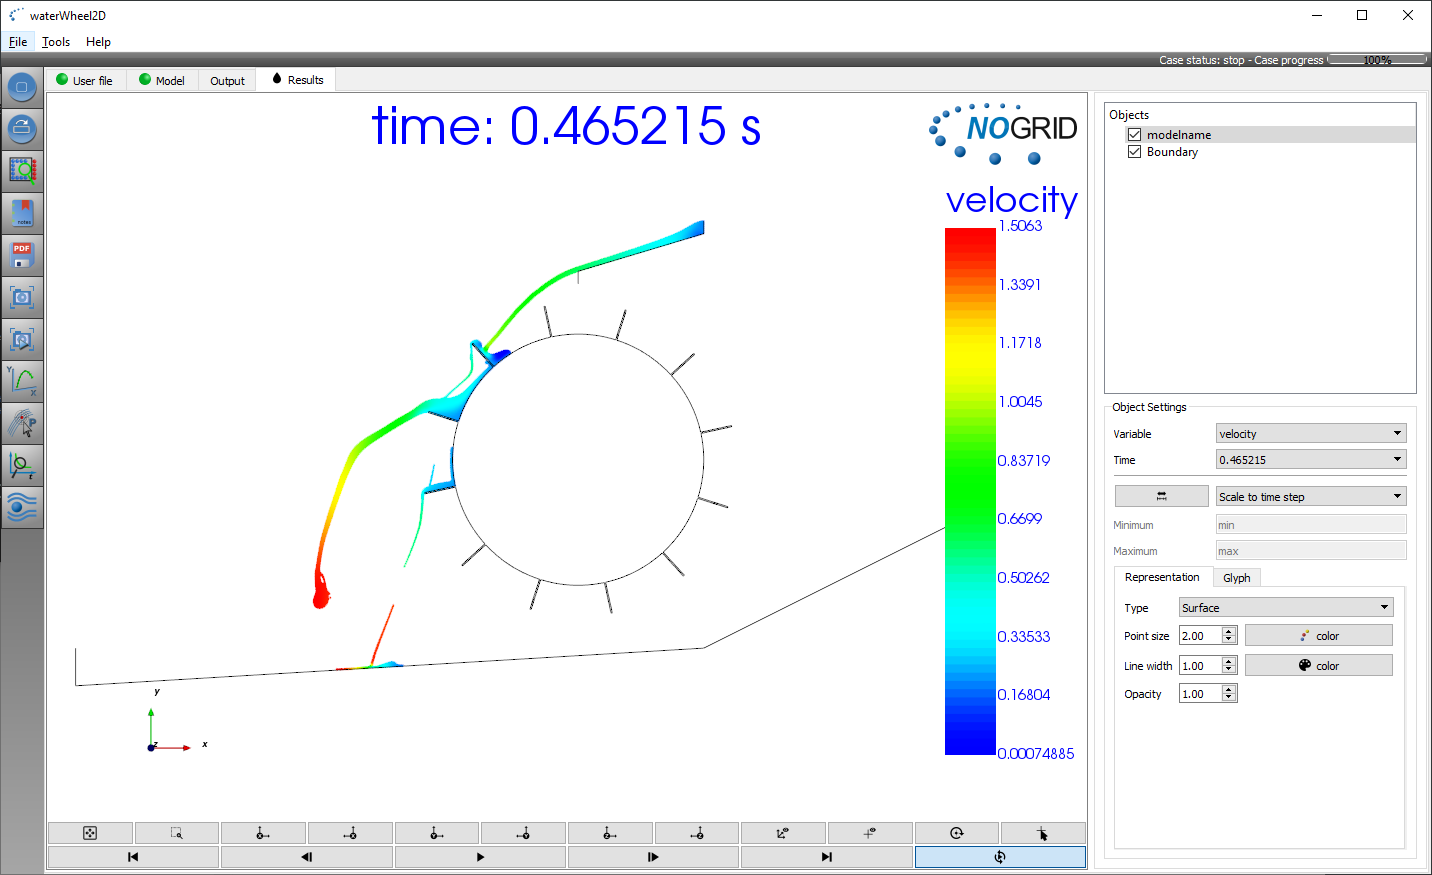 2D water wheel GUI results in NOGRID points software